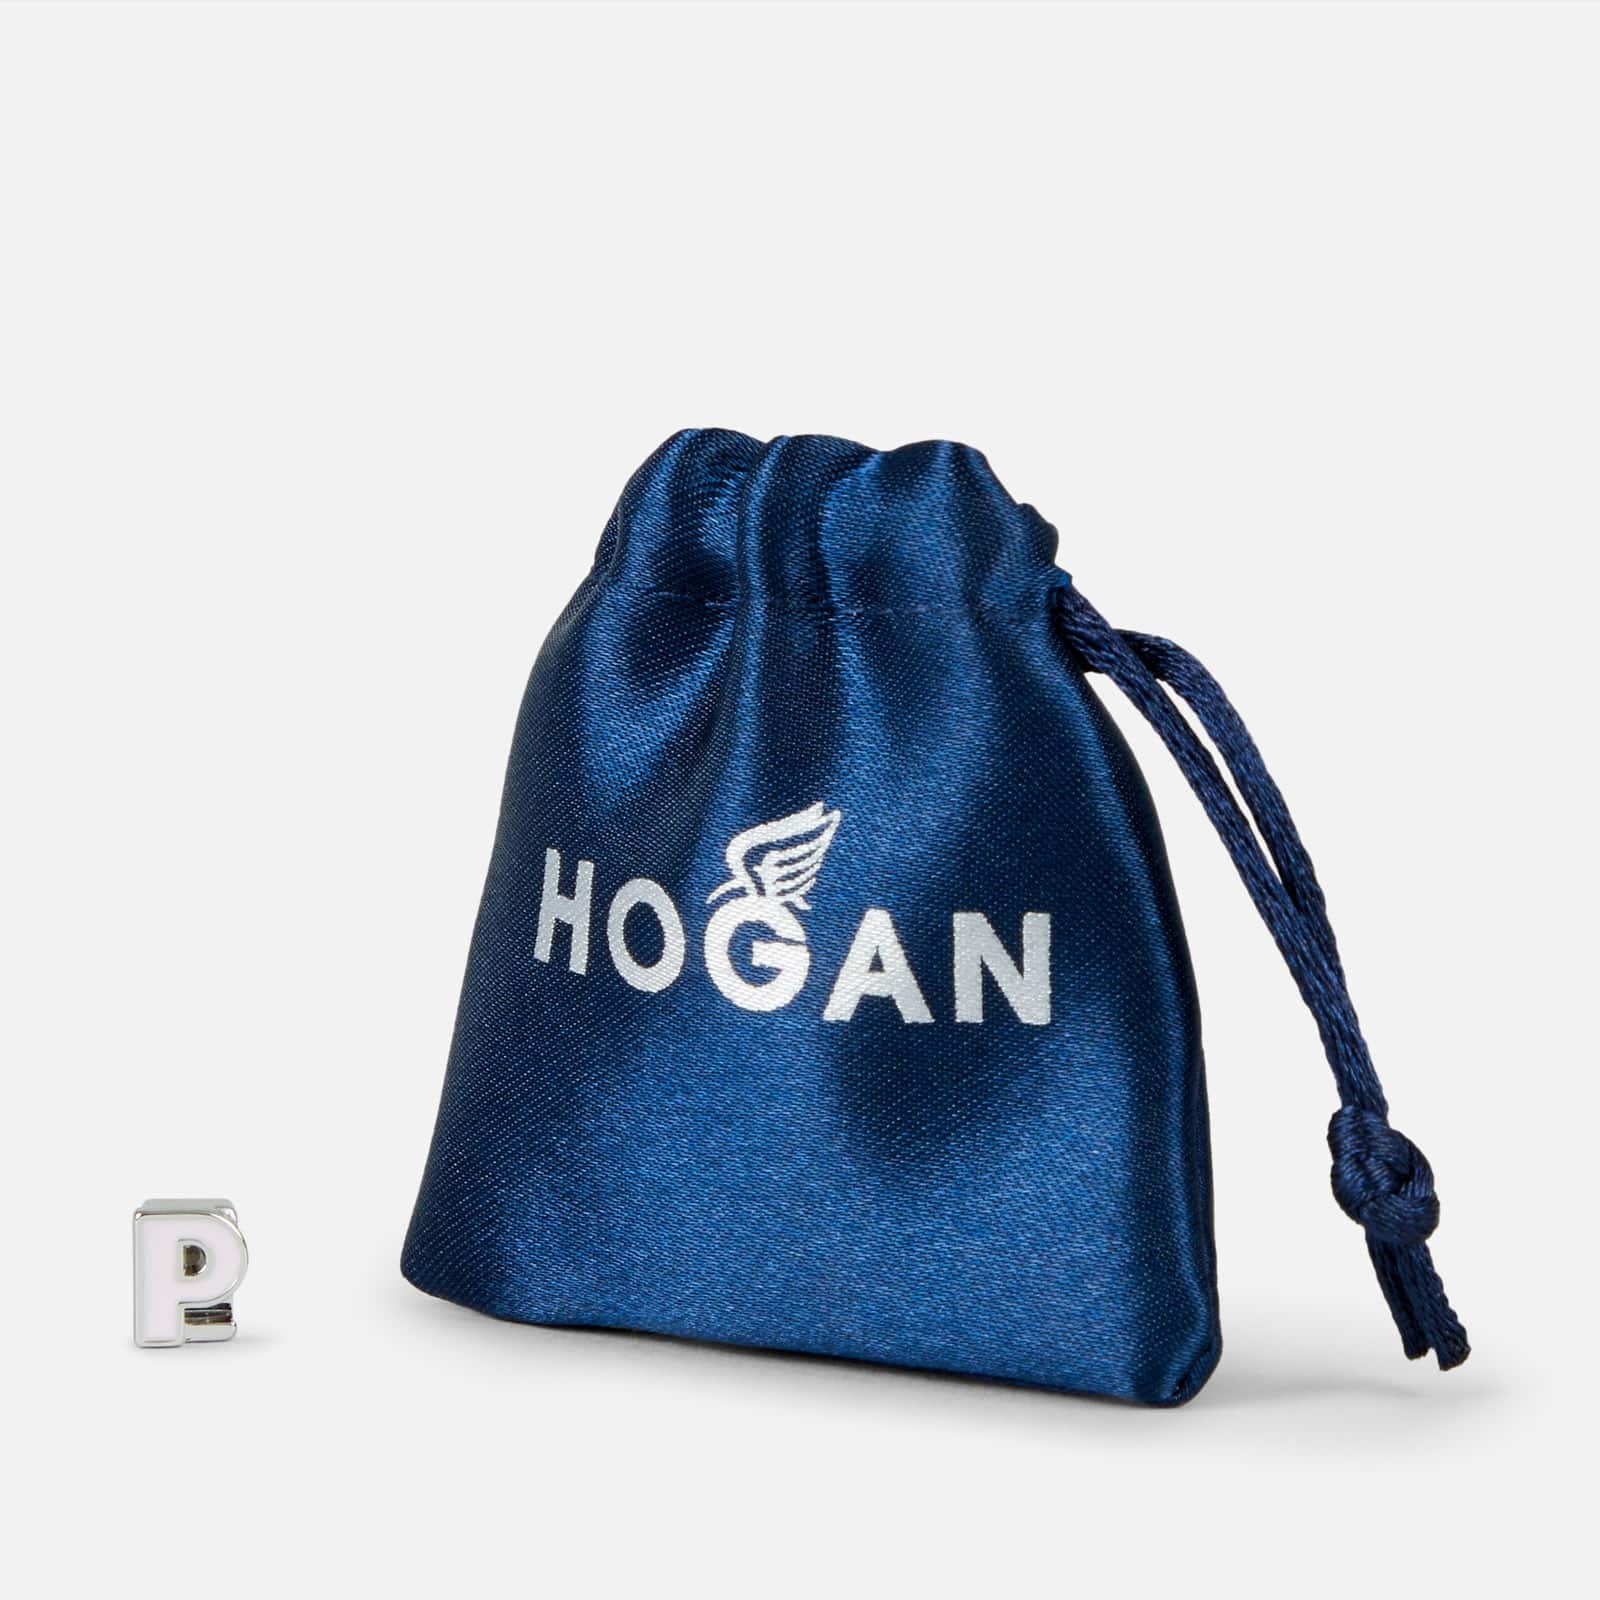 Hogan By You - Shoelace Bead White Gold - 2